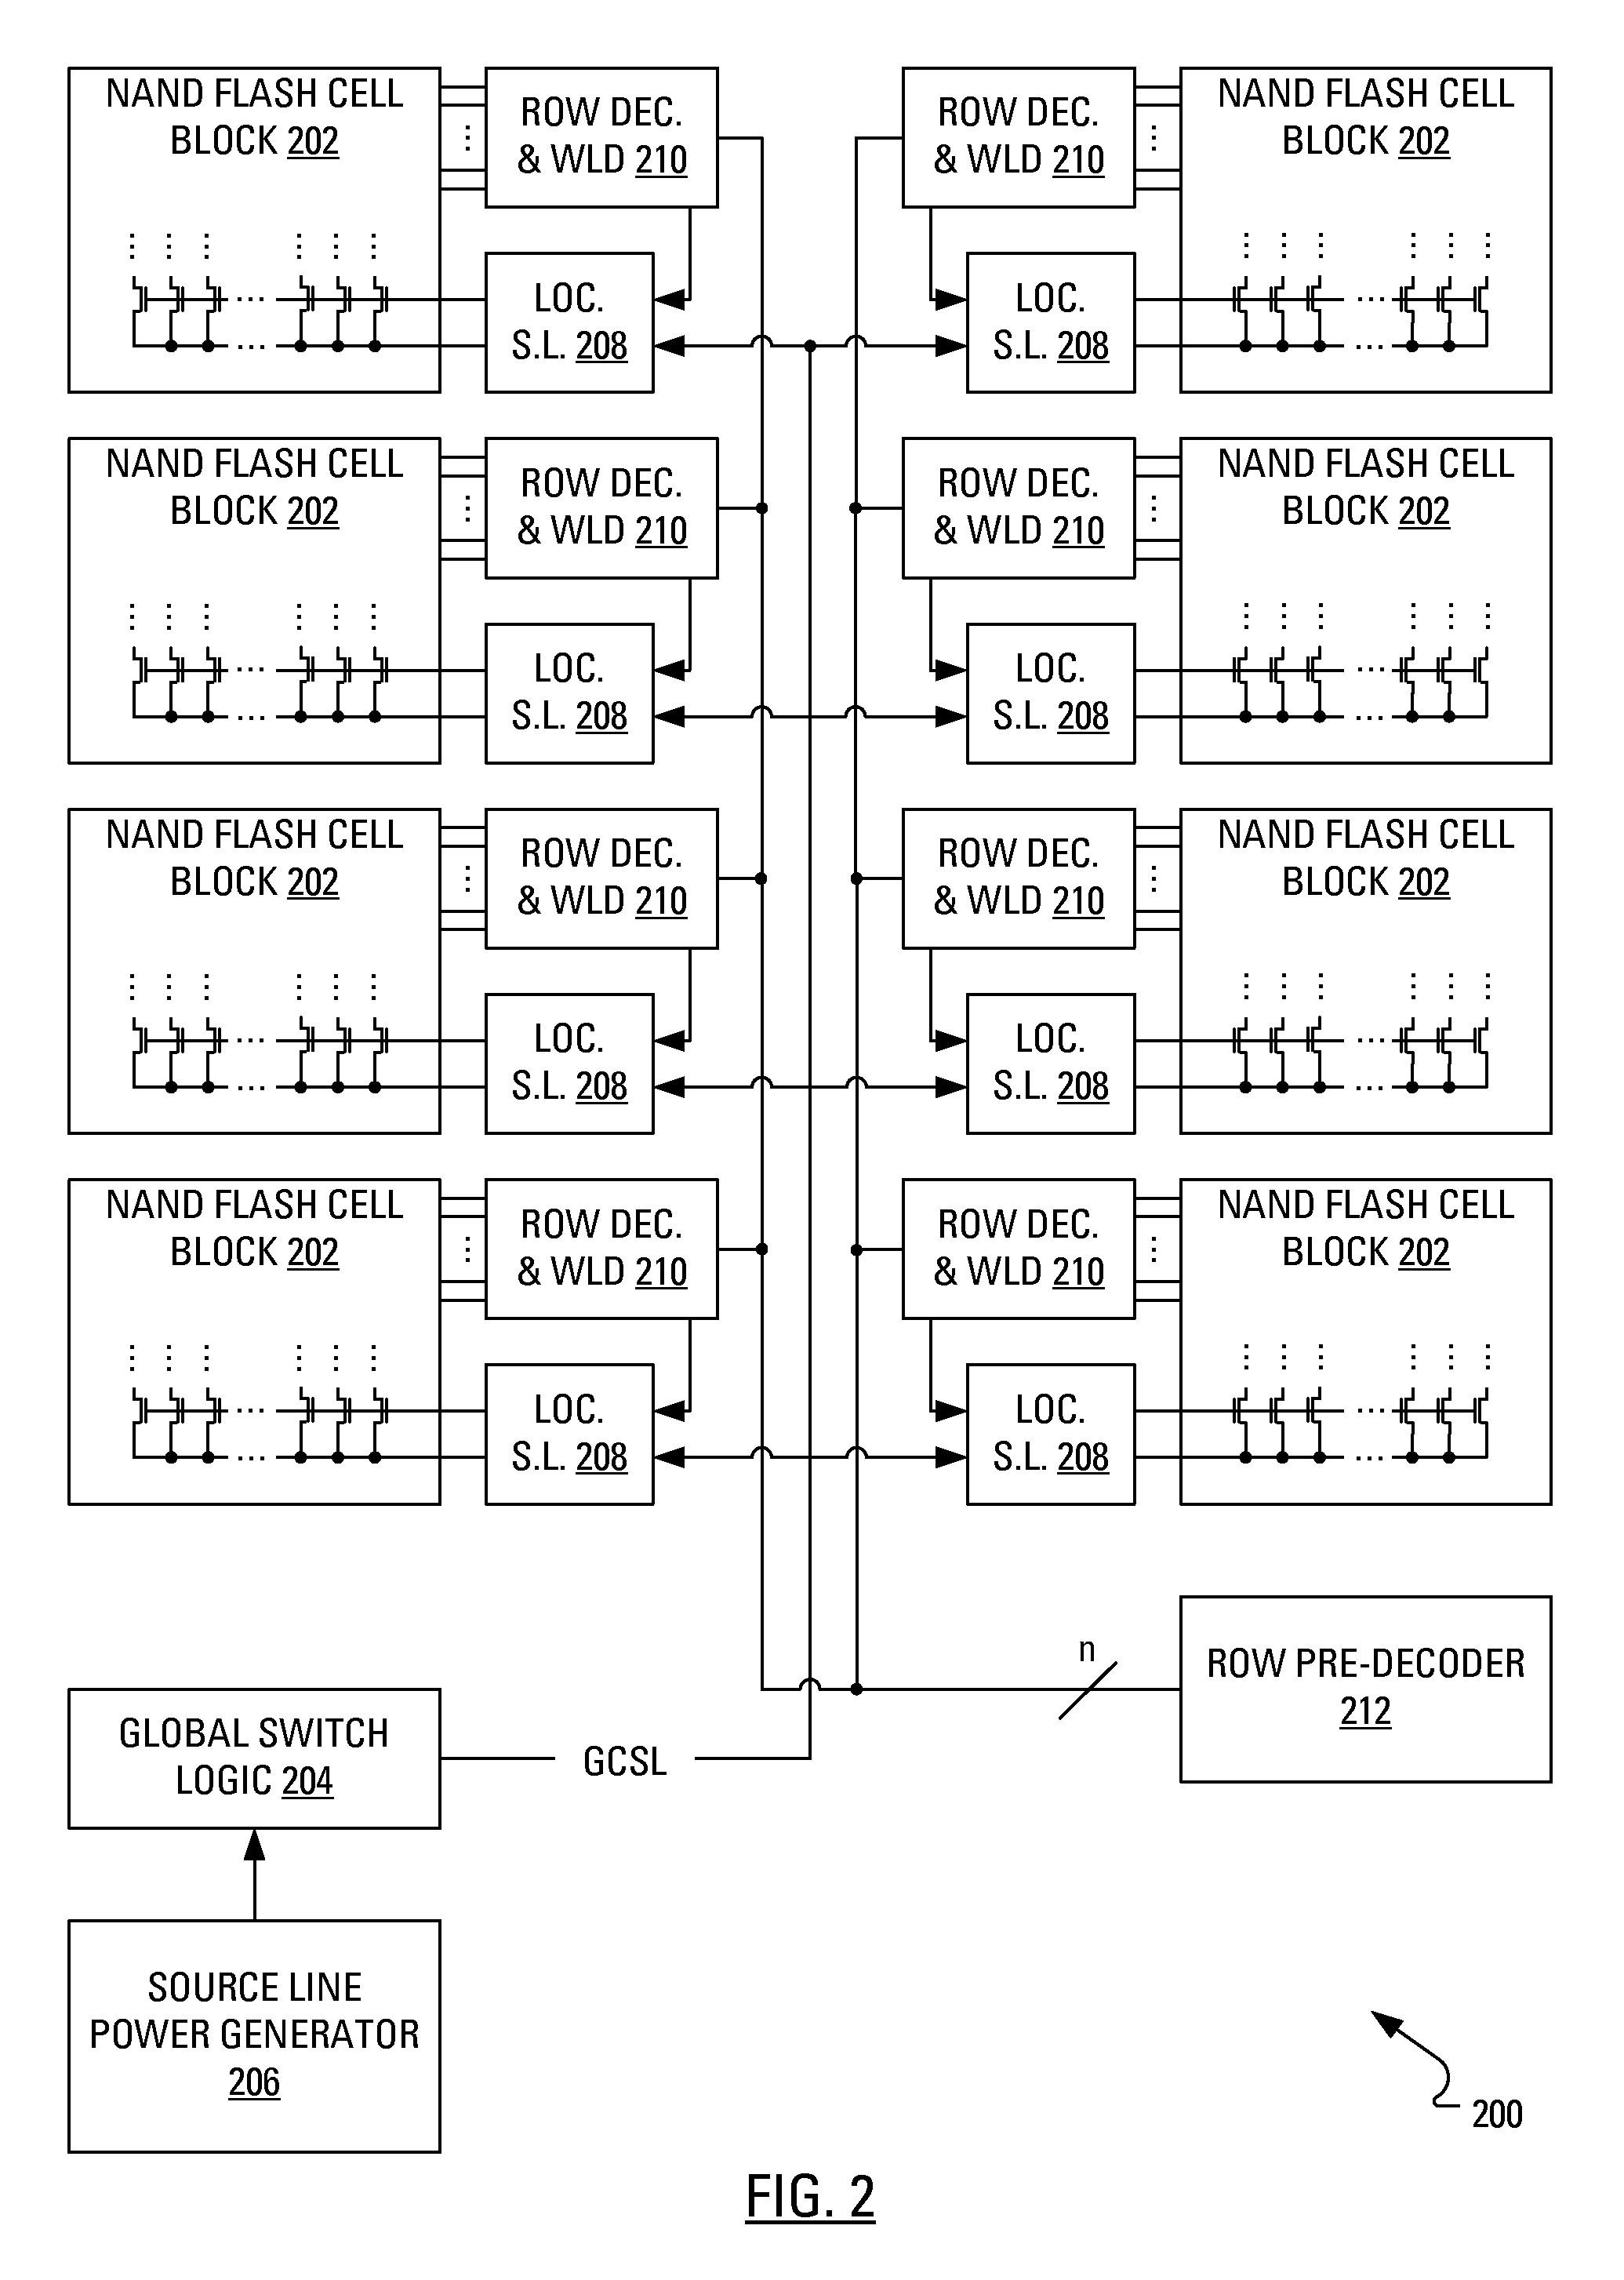 Hierarchical common source line structure in NAND flash memory